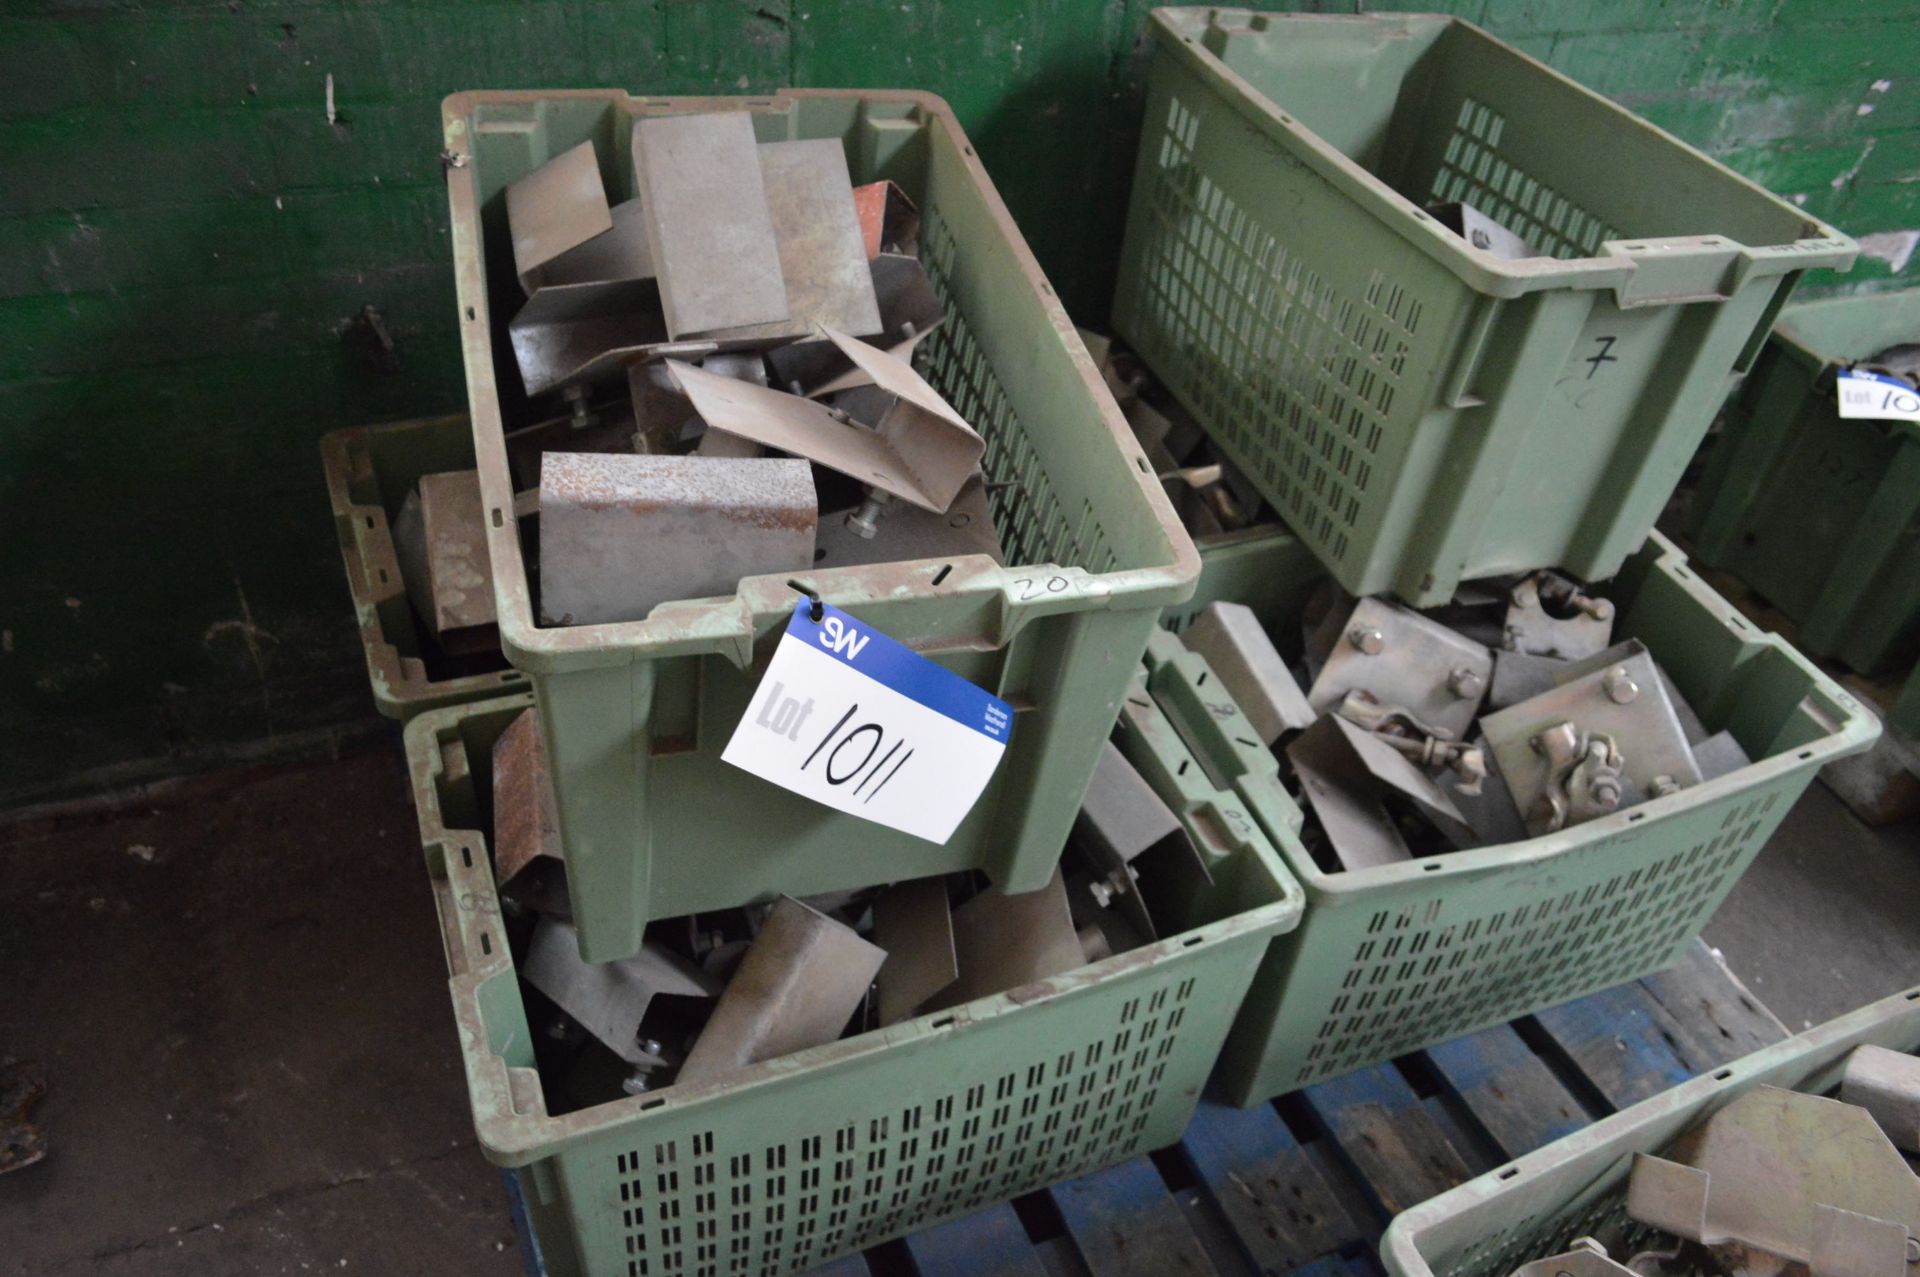 Approx. 100 Scaffolding Clamps, as set out in six boxes on pallet